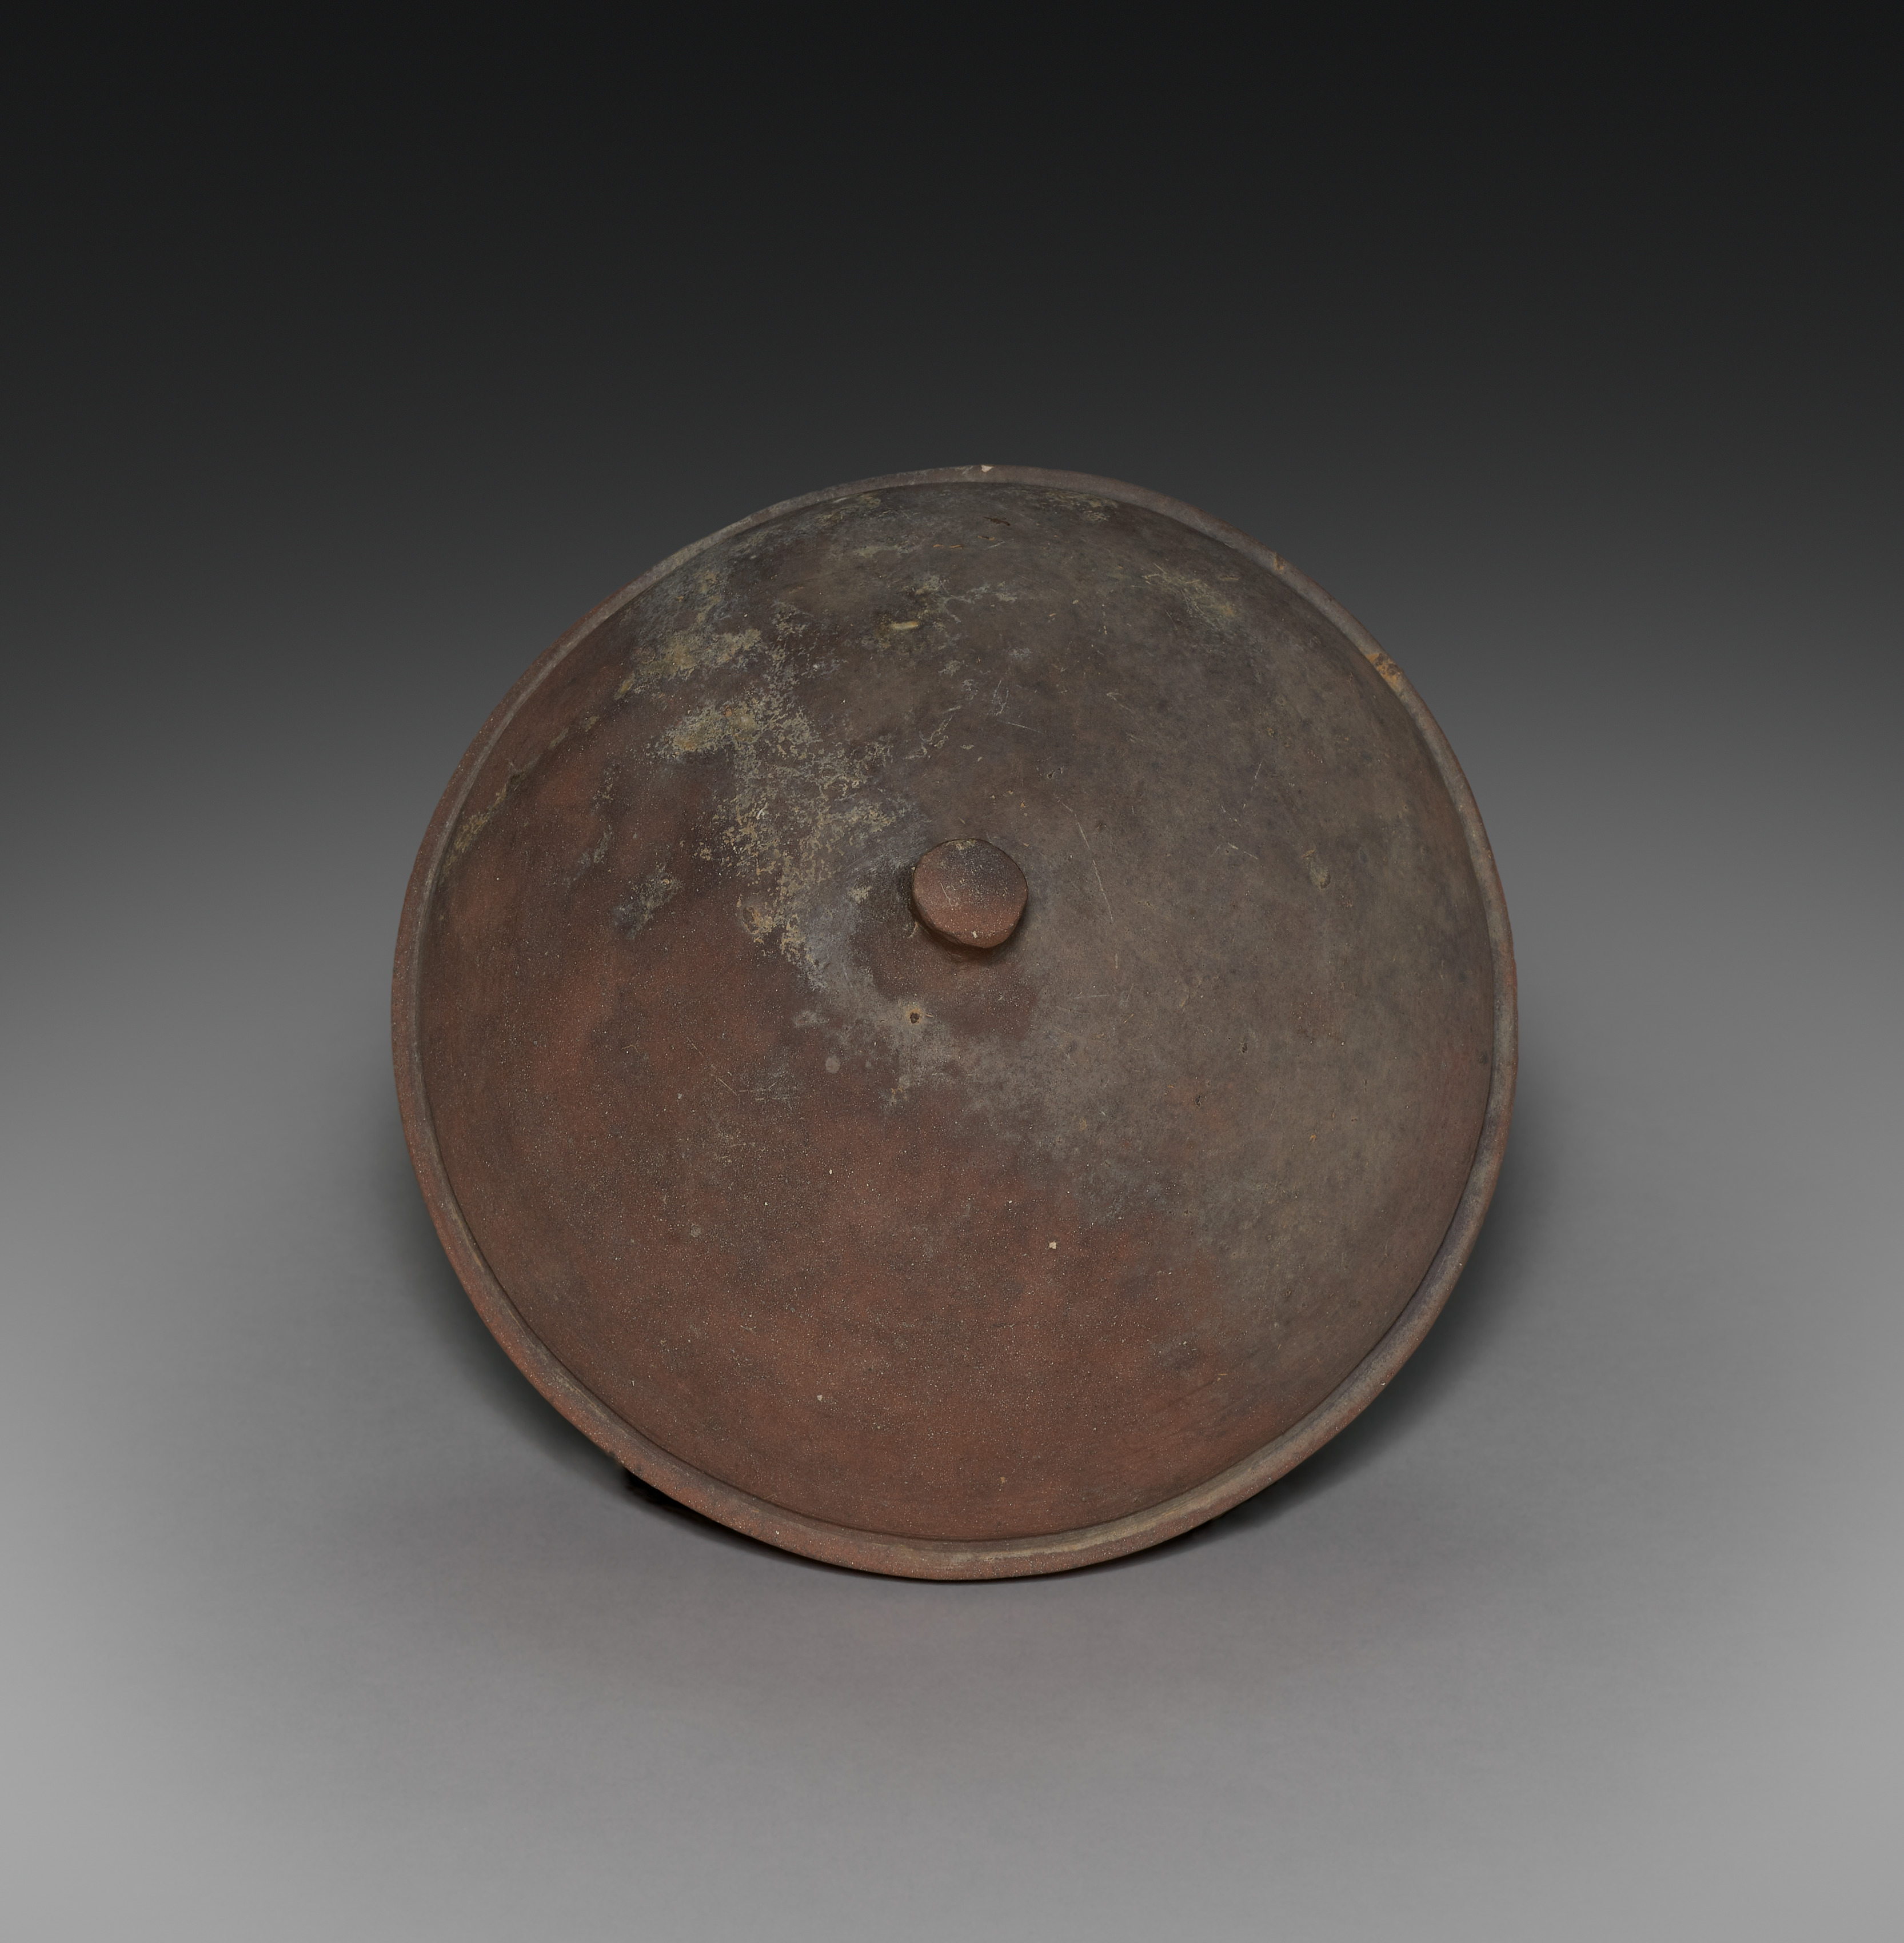 Vessel with Knobbed Lid (lid)